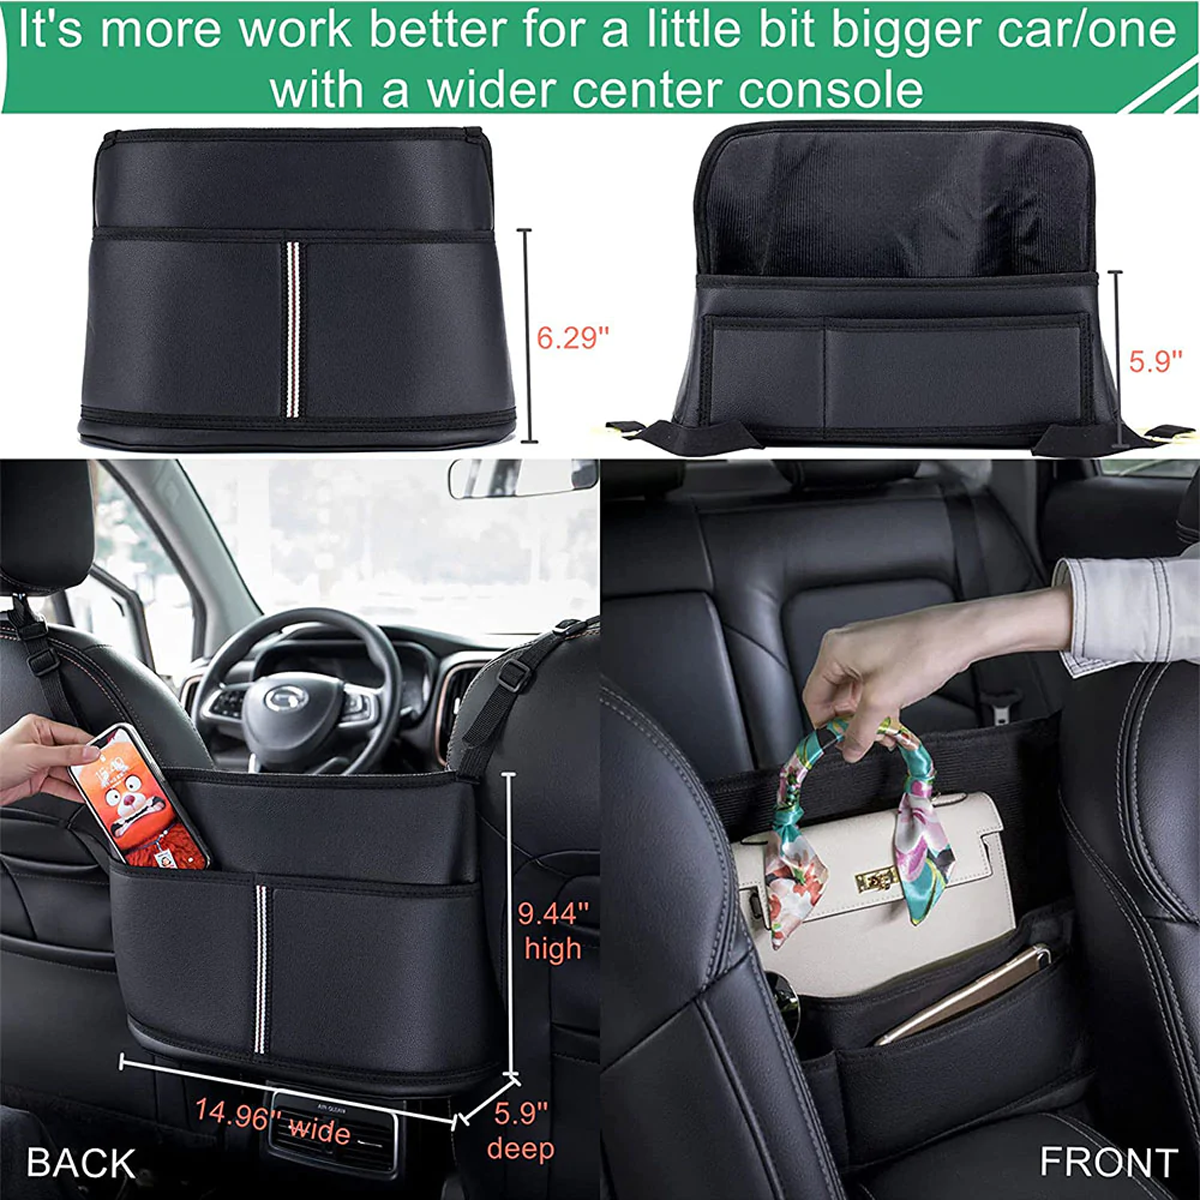 Get the Car Cache Purse Holder for Up to 51% Off